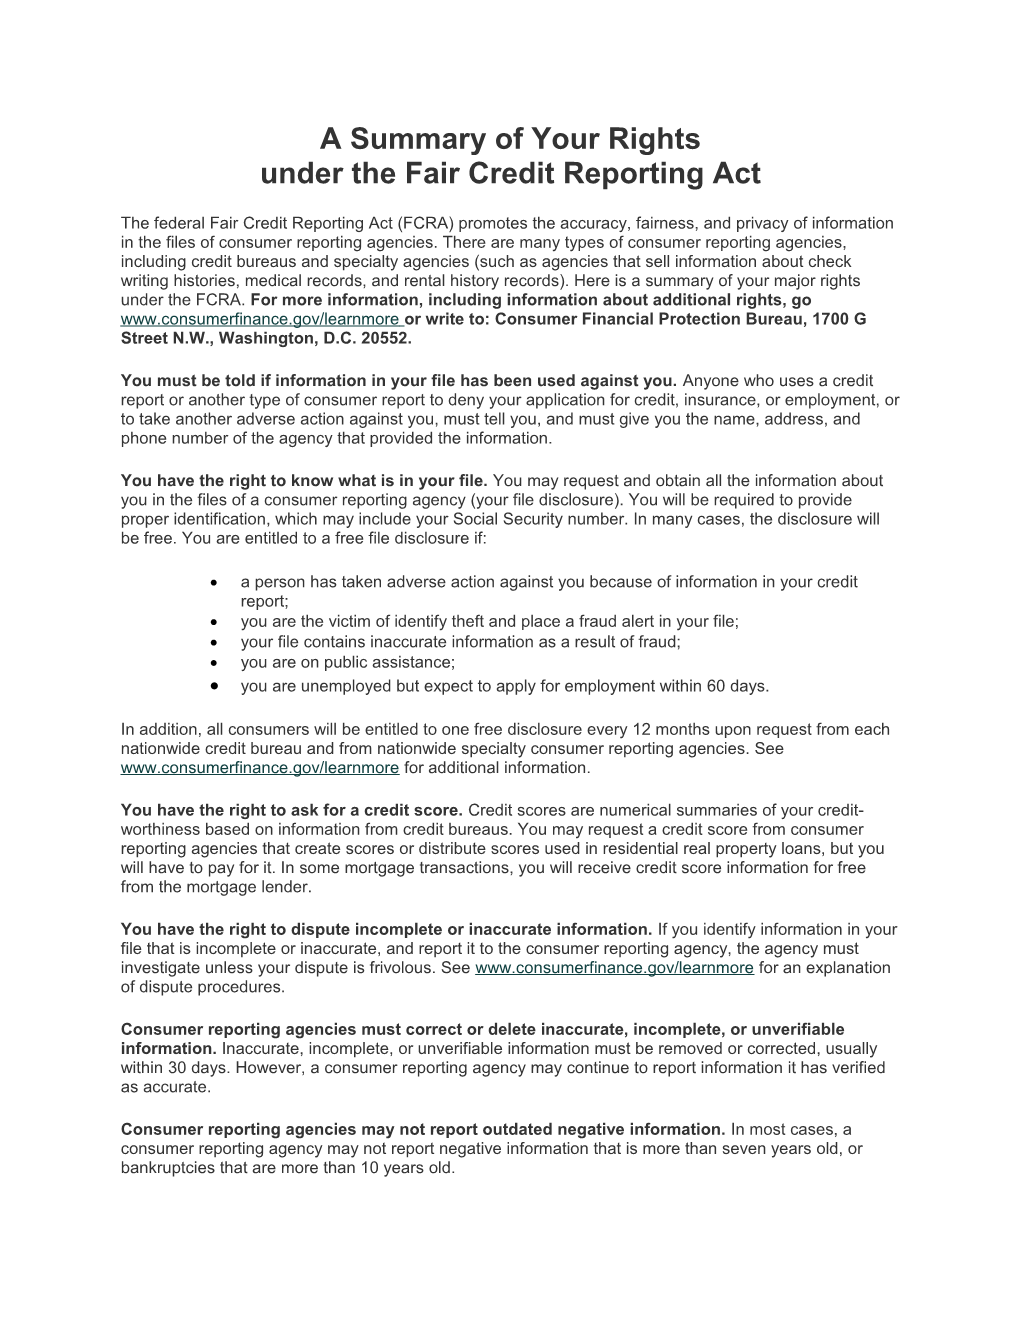 A Summary of Your Rights Under the Fair Credit Reporting Act